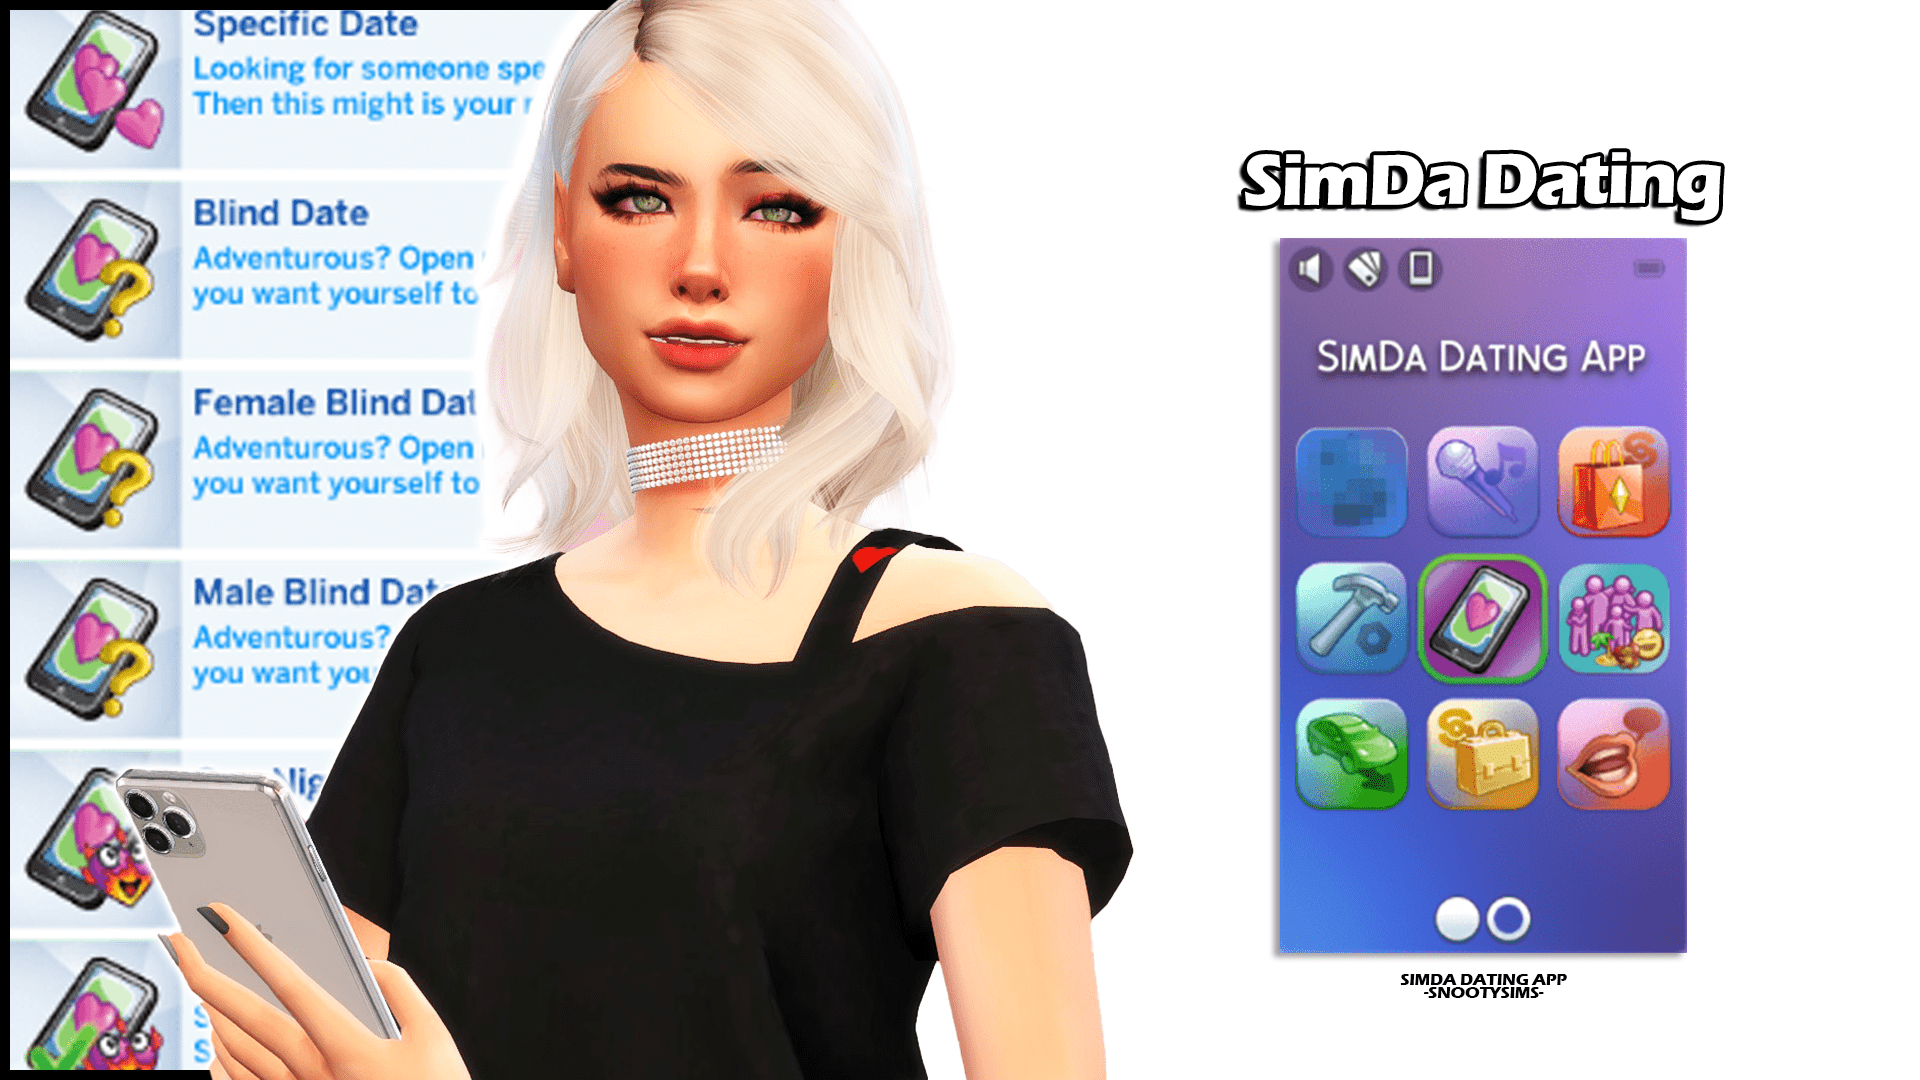 The Sims 4 Dating App Mod A New Way to Find Love CarynPritchard